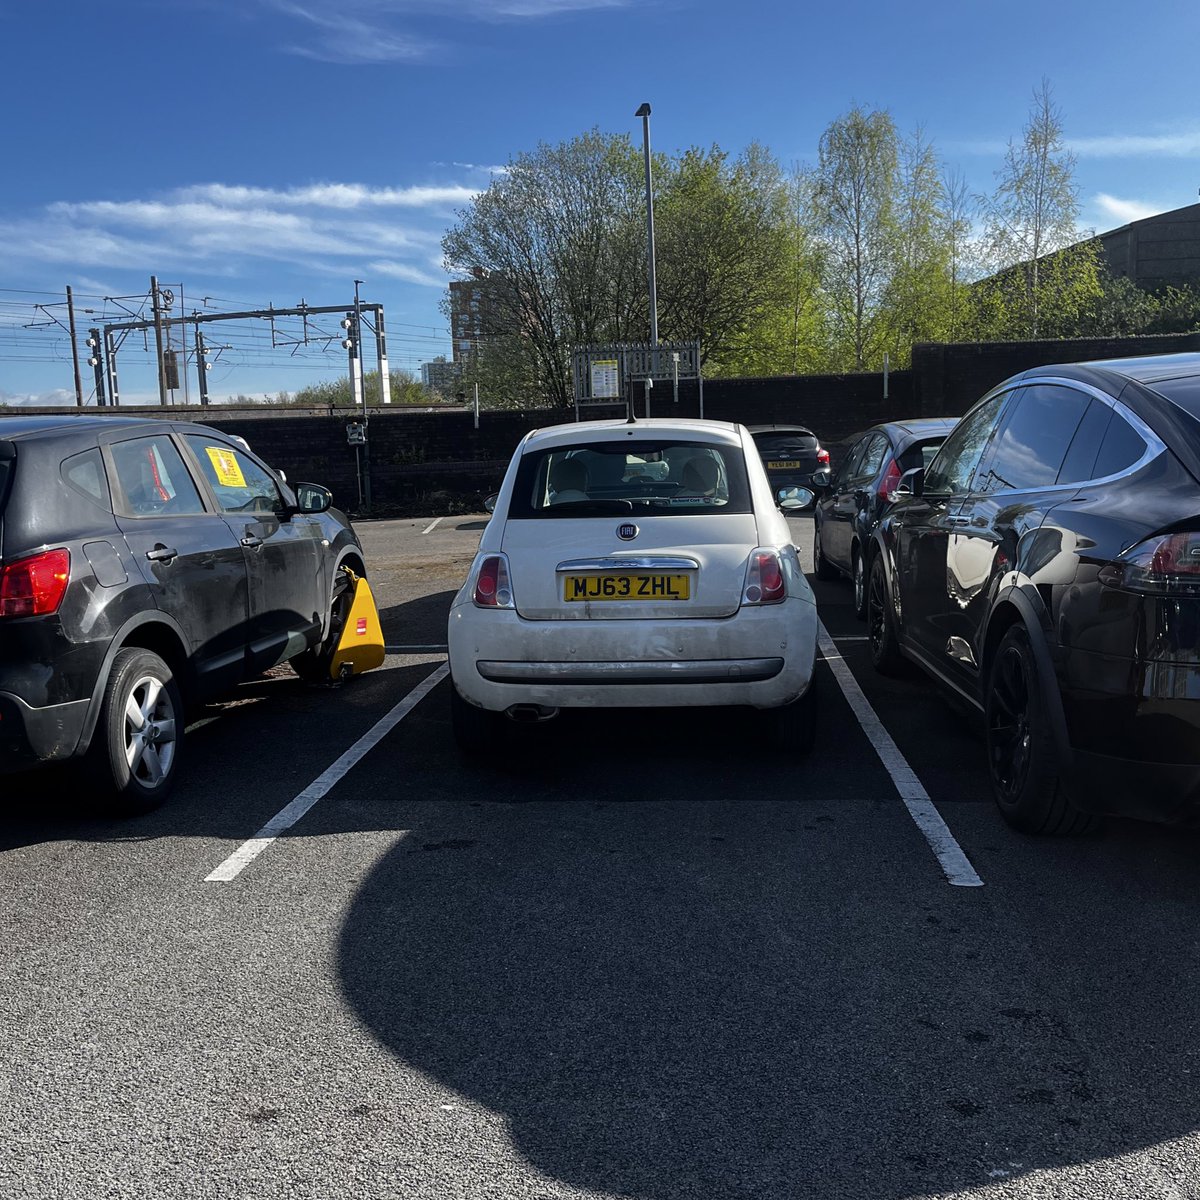 Why have I just been edged by a parking space. Fuck Fiat500s.